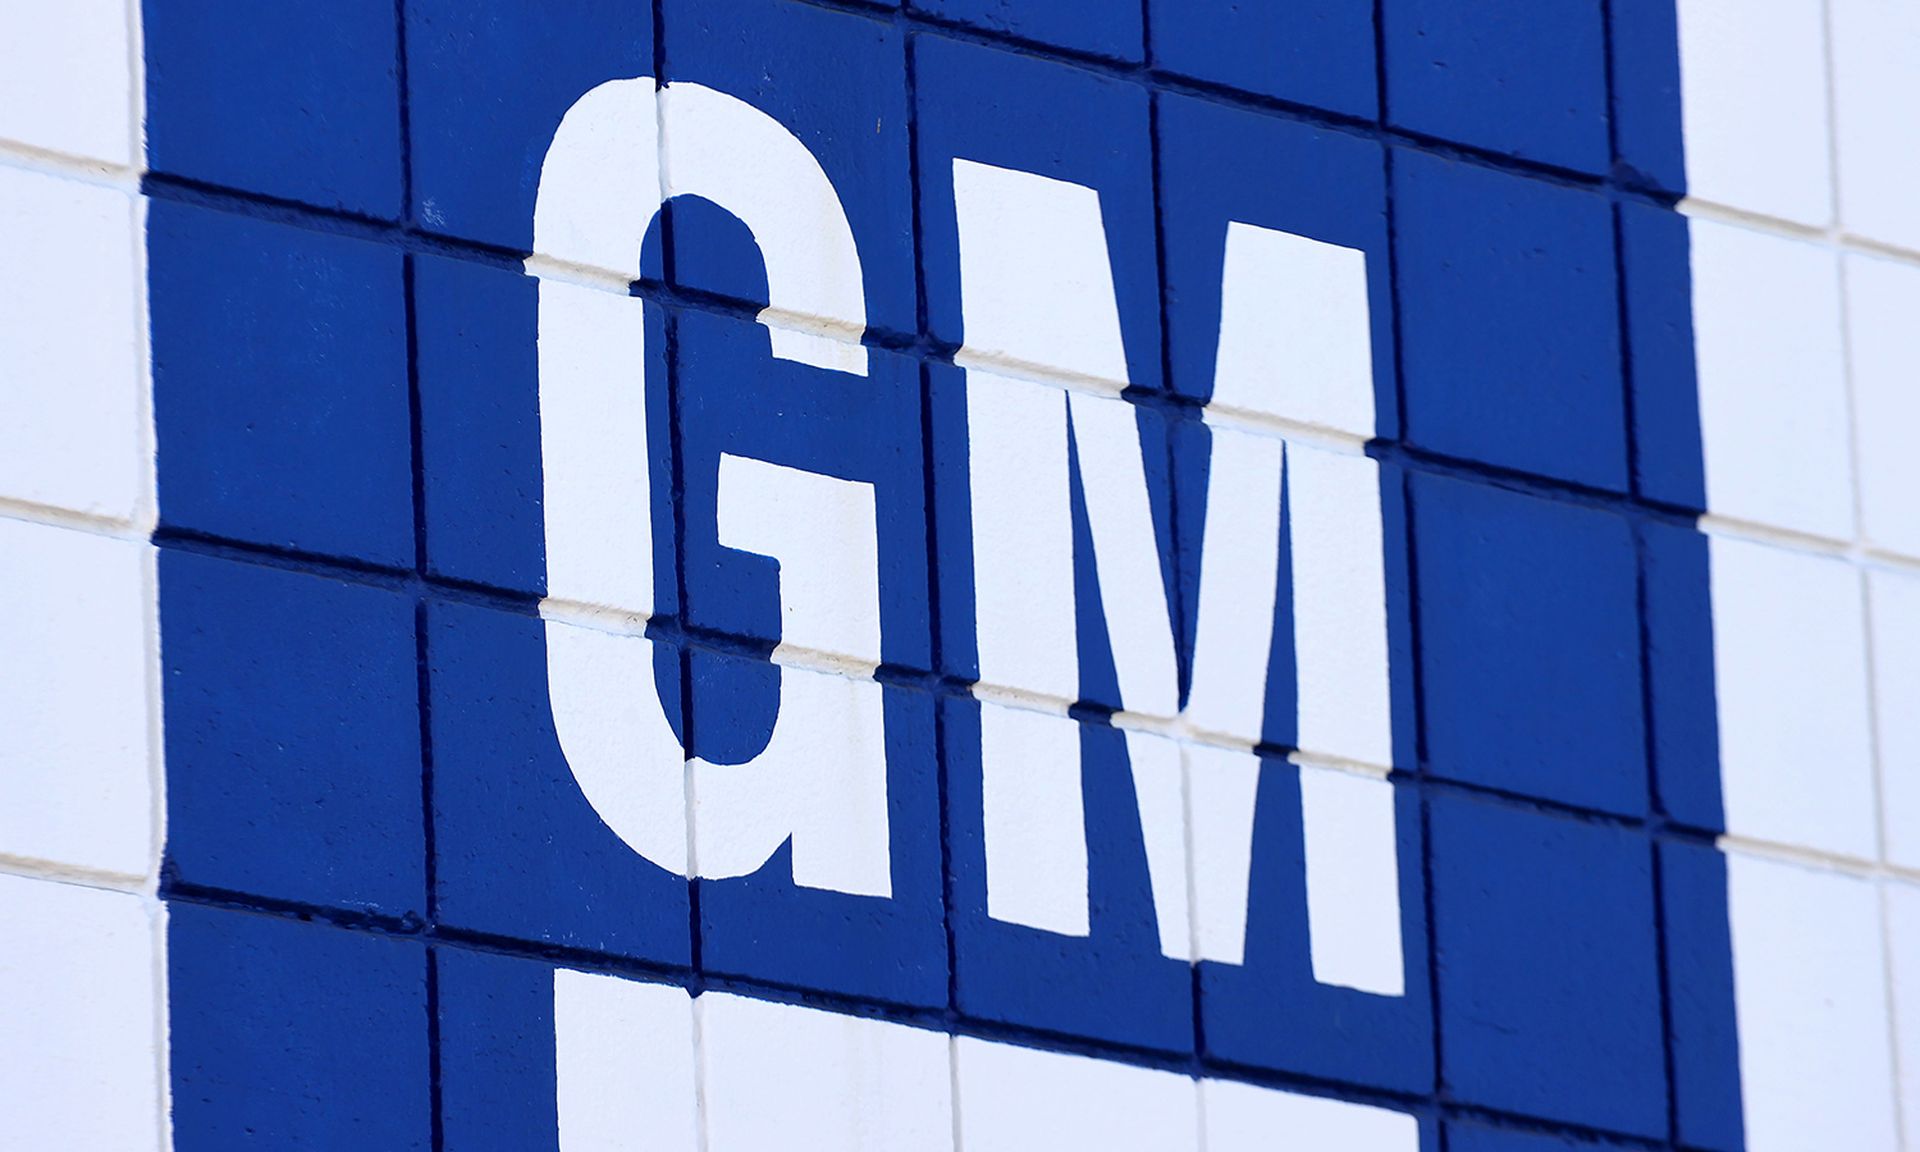 The General Motors logo is displayed at a Chevrolet dealership on Aug. 4, 2021, in Burbank, Calif. (Photo by Mario Tama/Getty Images)